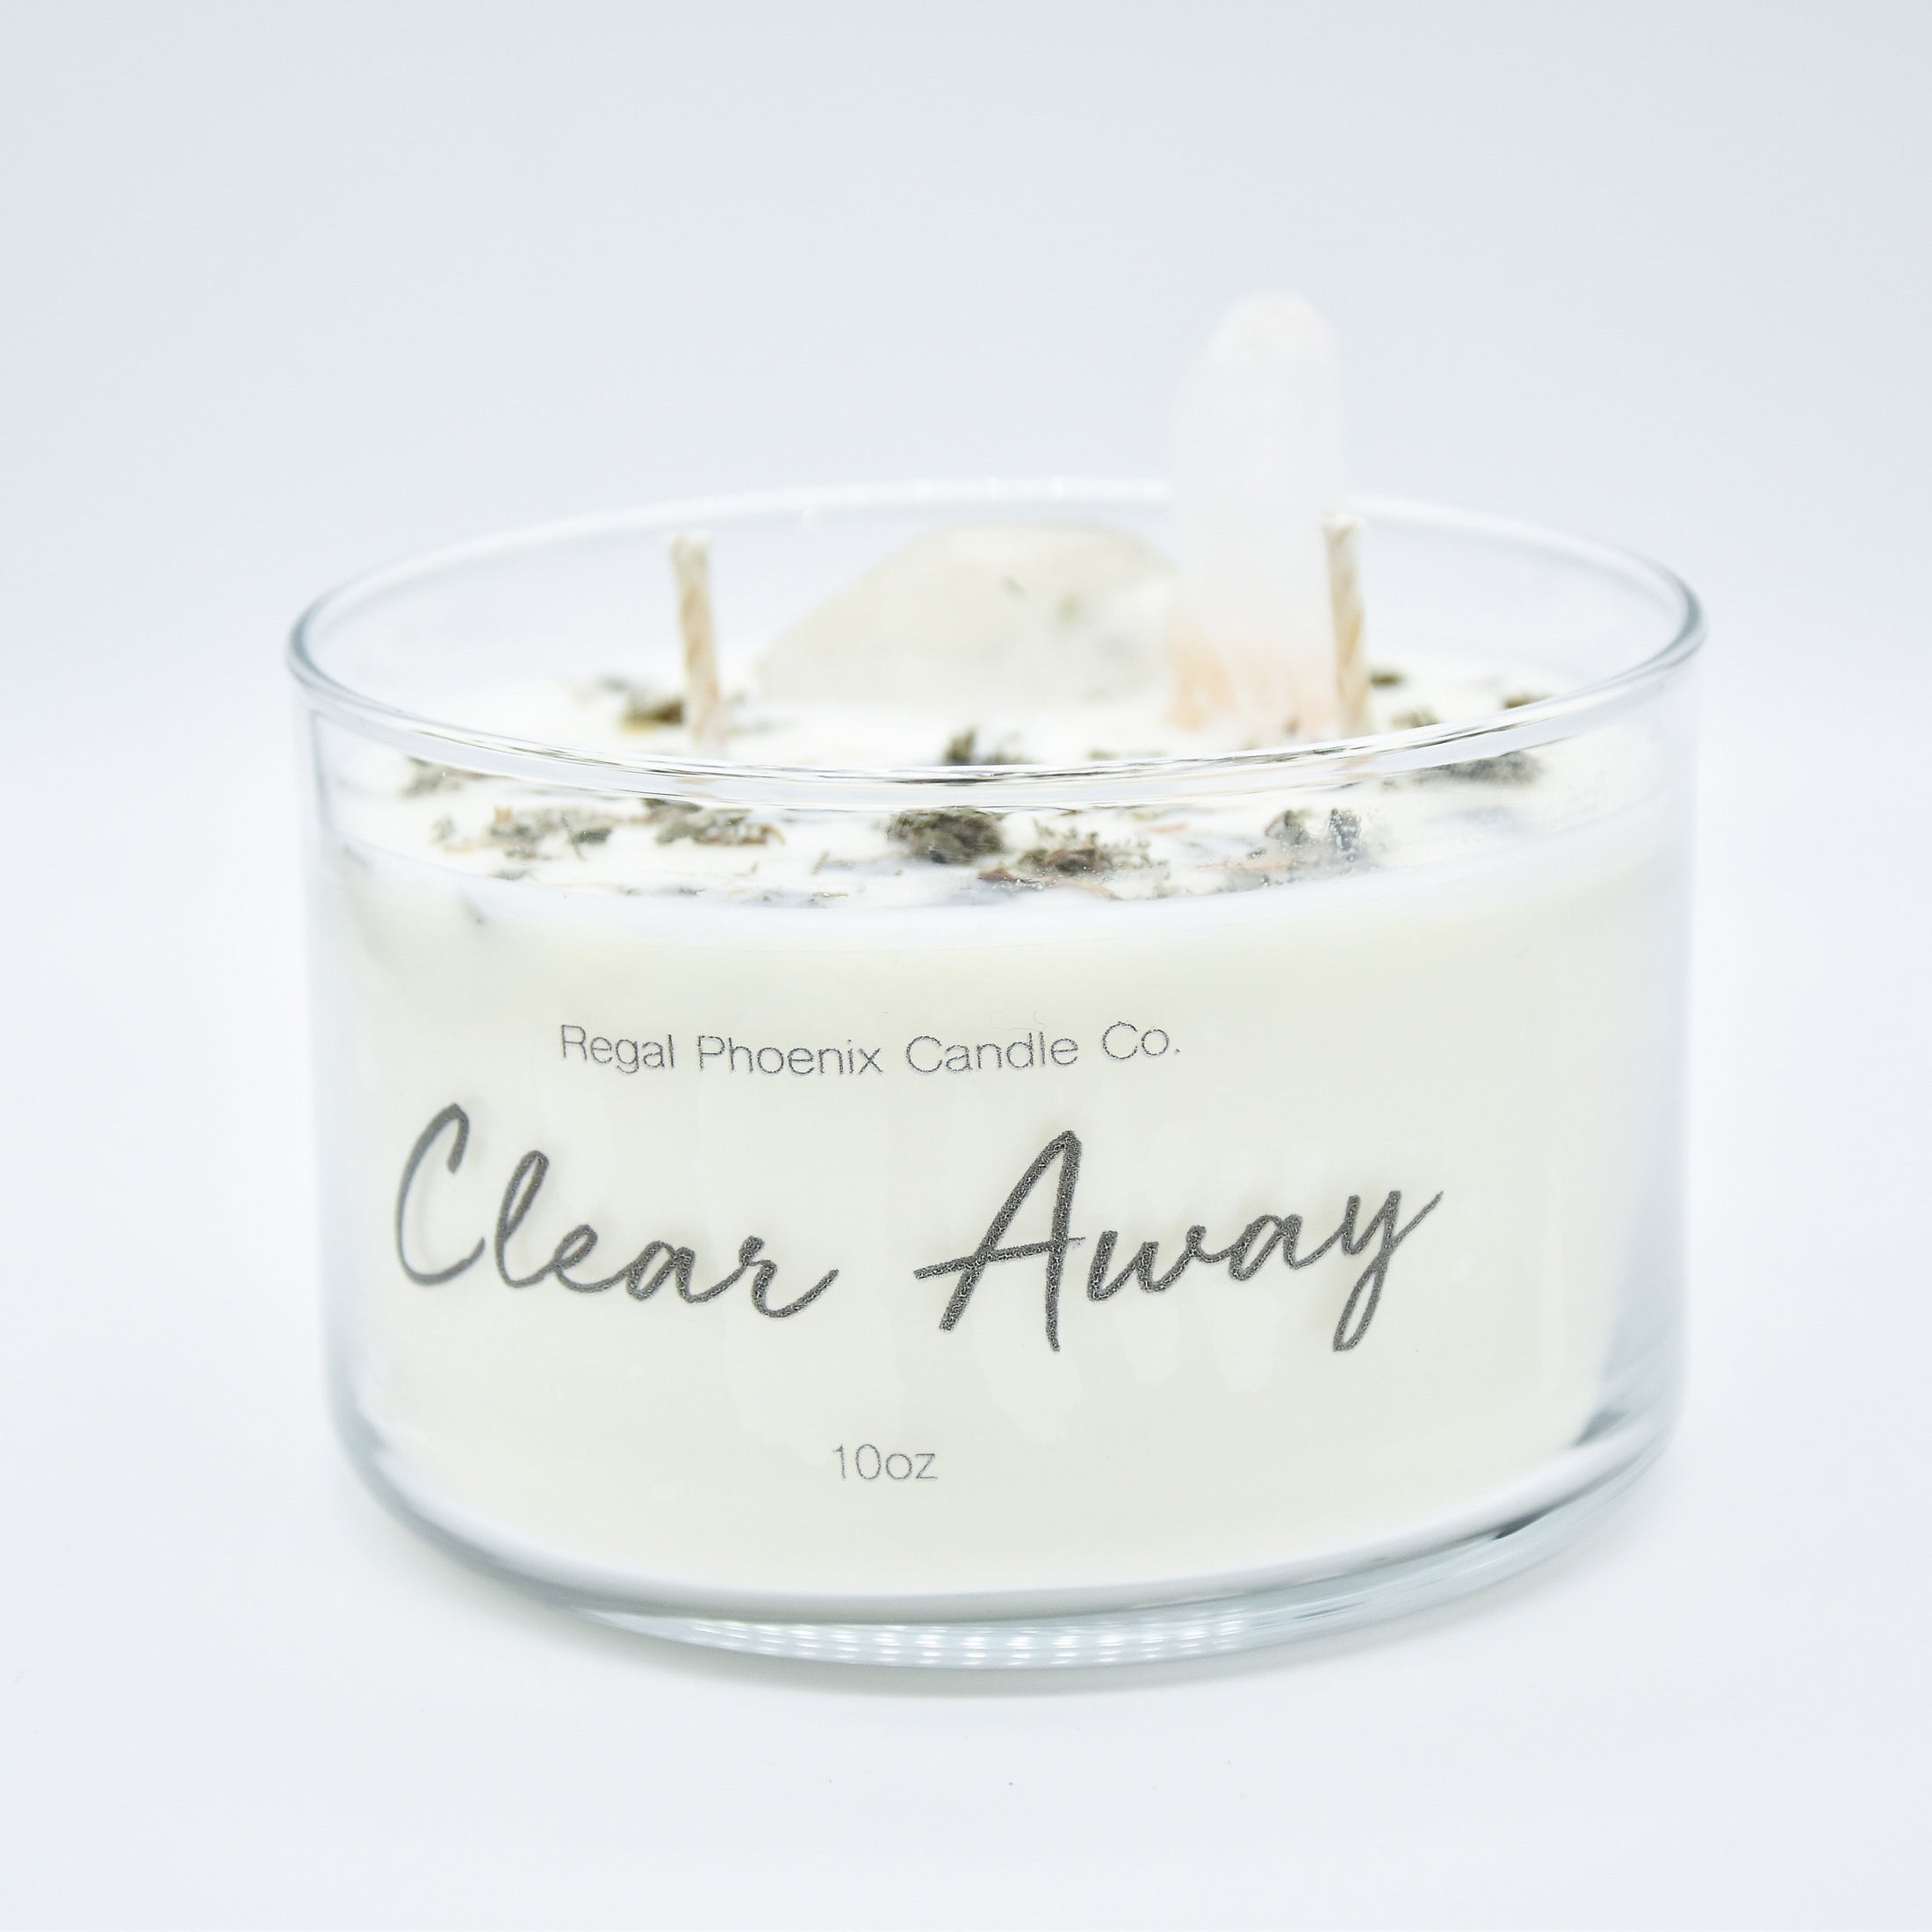 "CleanseHer" Crystal Infused Soy Candle